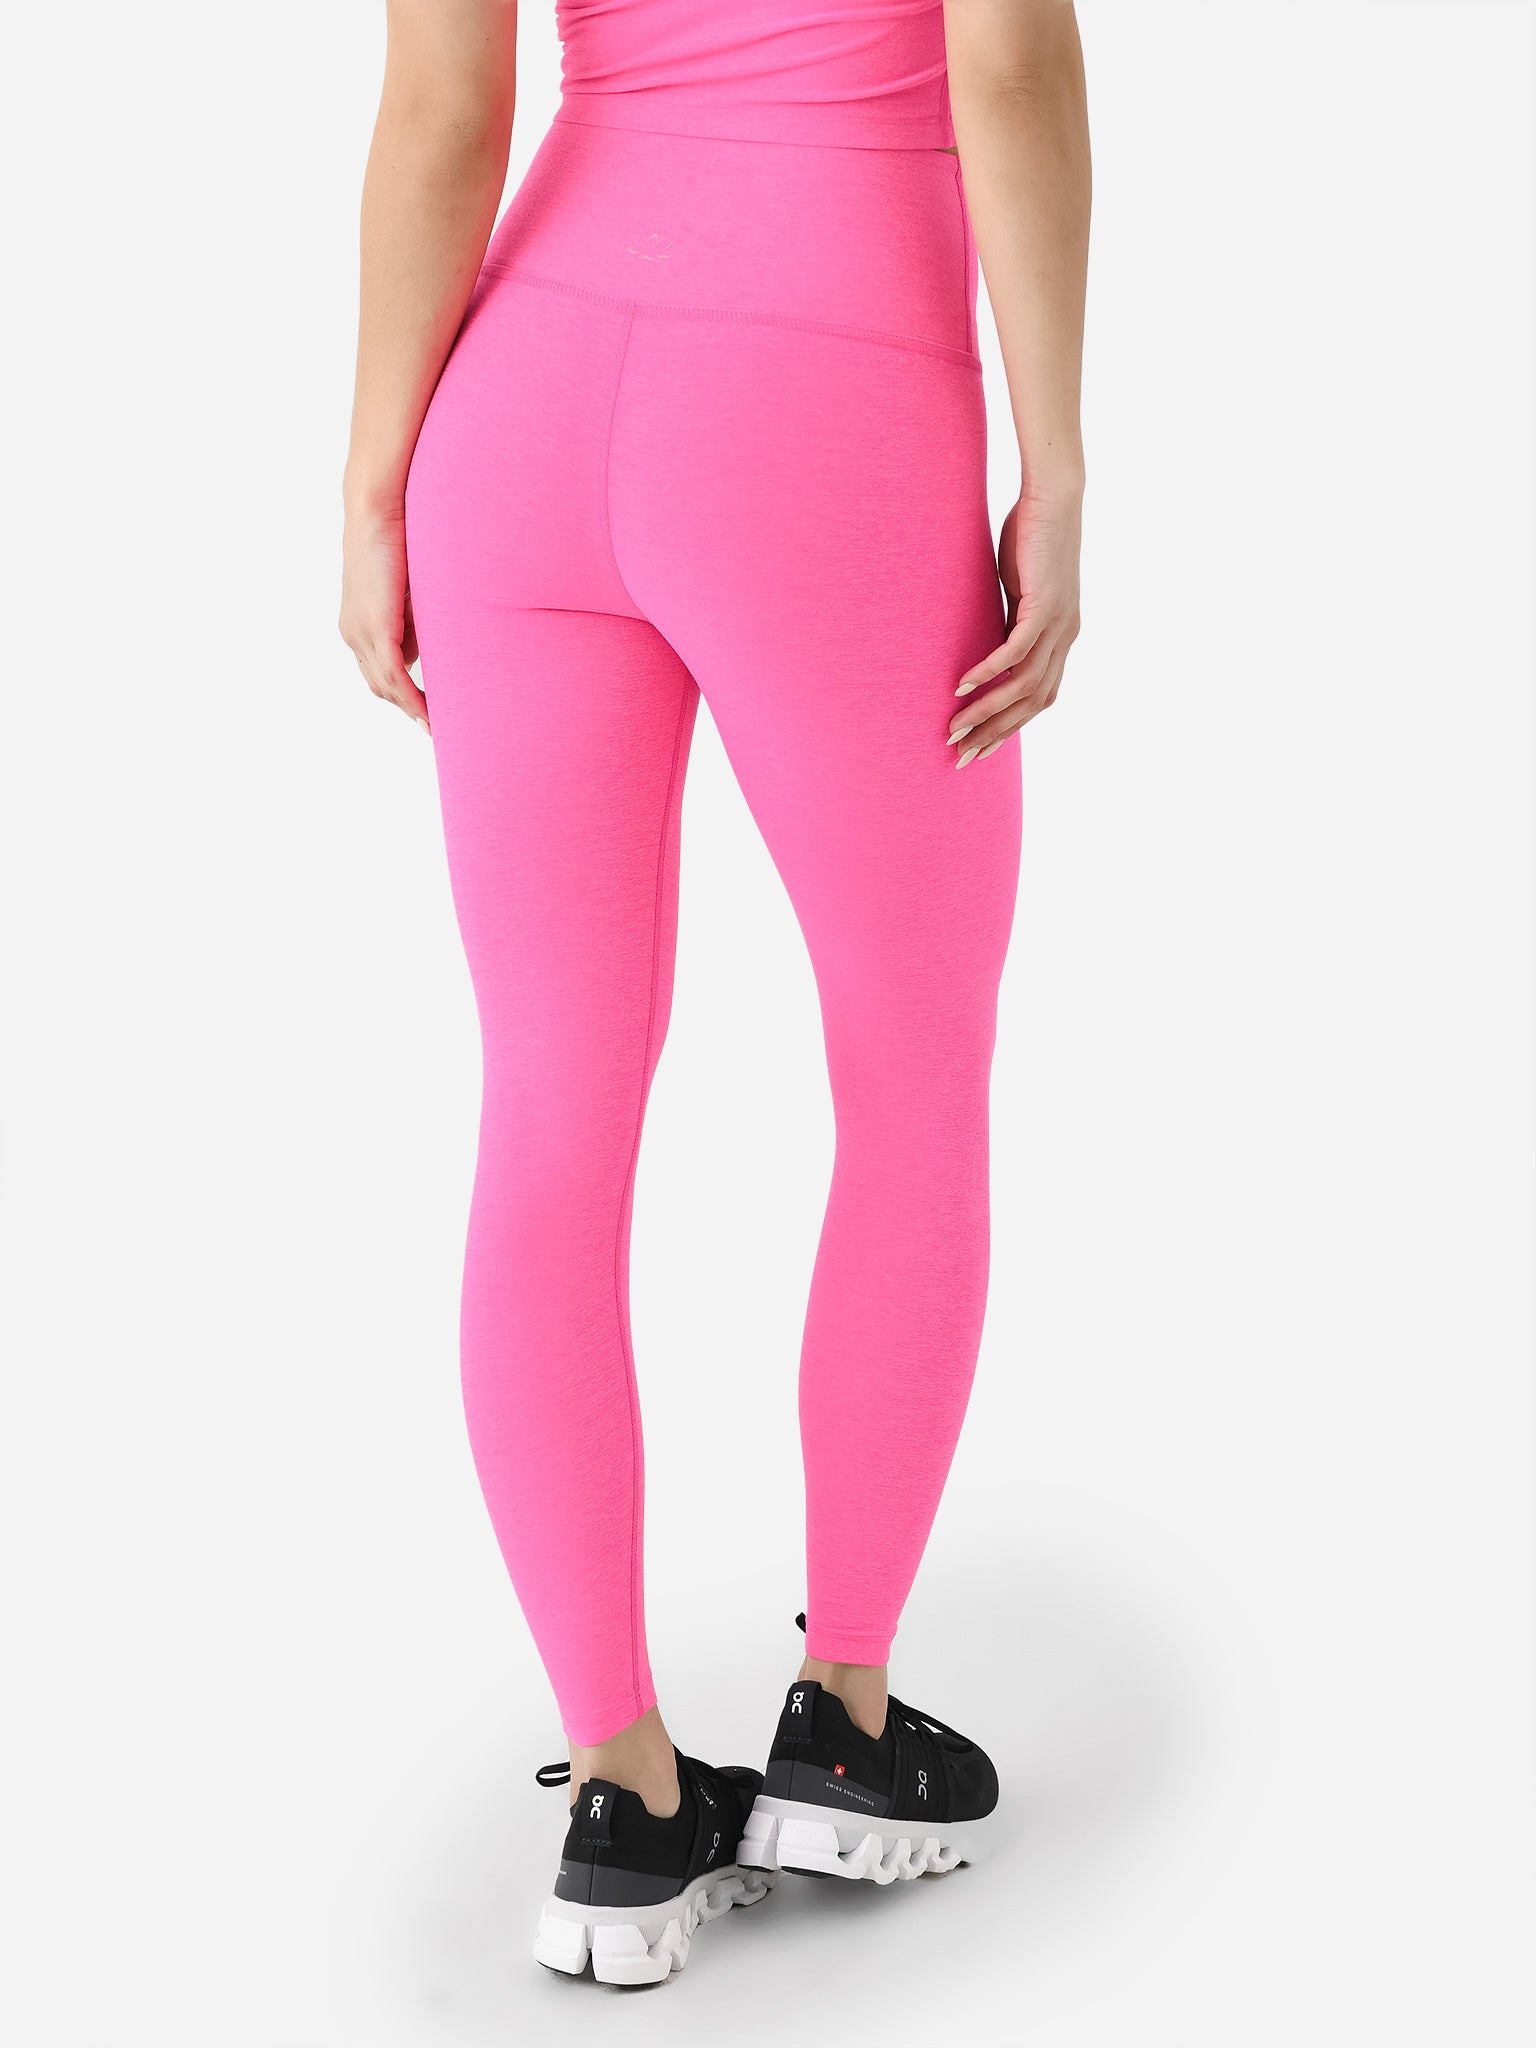 BEYOND YOGA SPACEDYE AT YOUR LEISURE HIGH WAIST MIDI LEGGING PINK BLOO –  Bubble Lounge Boutique